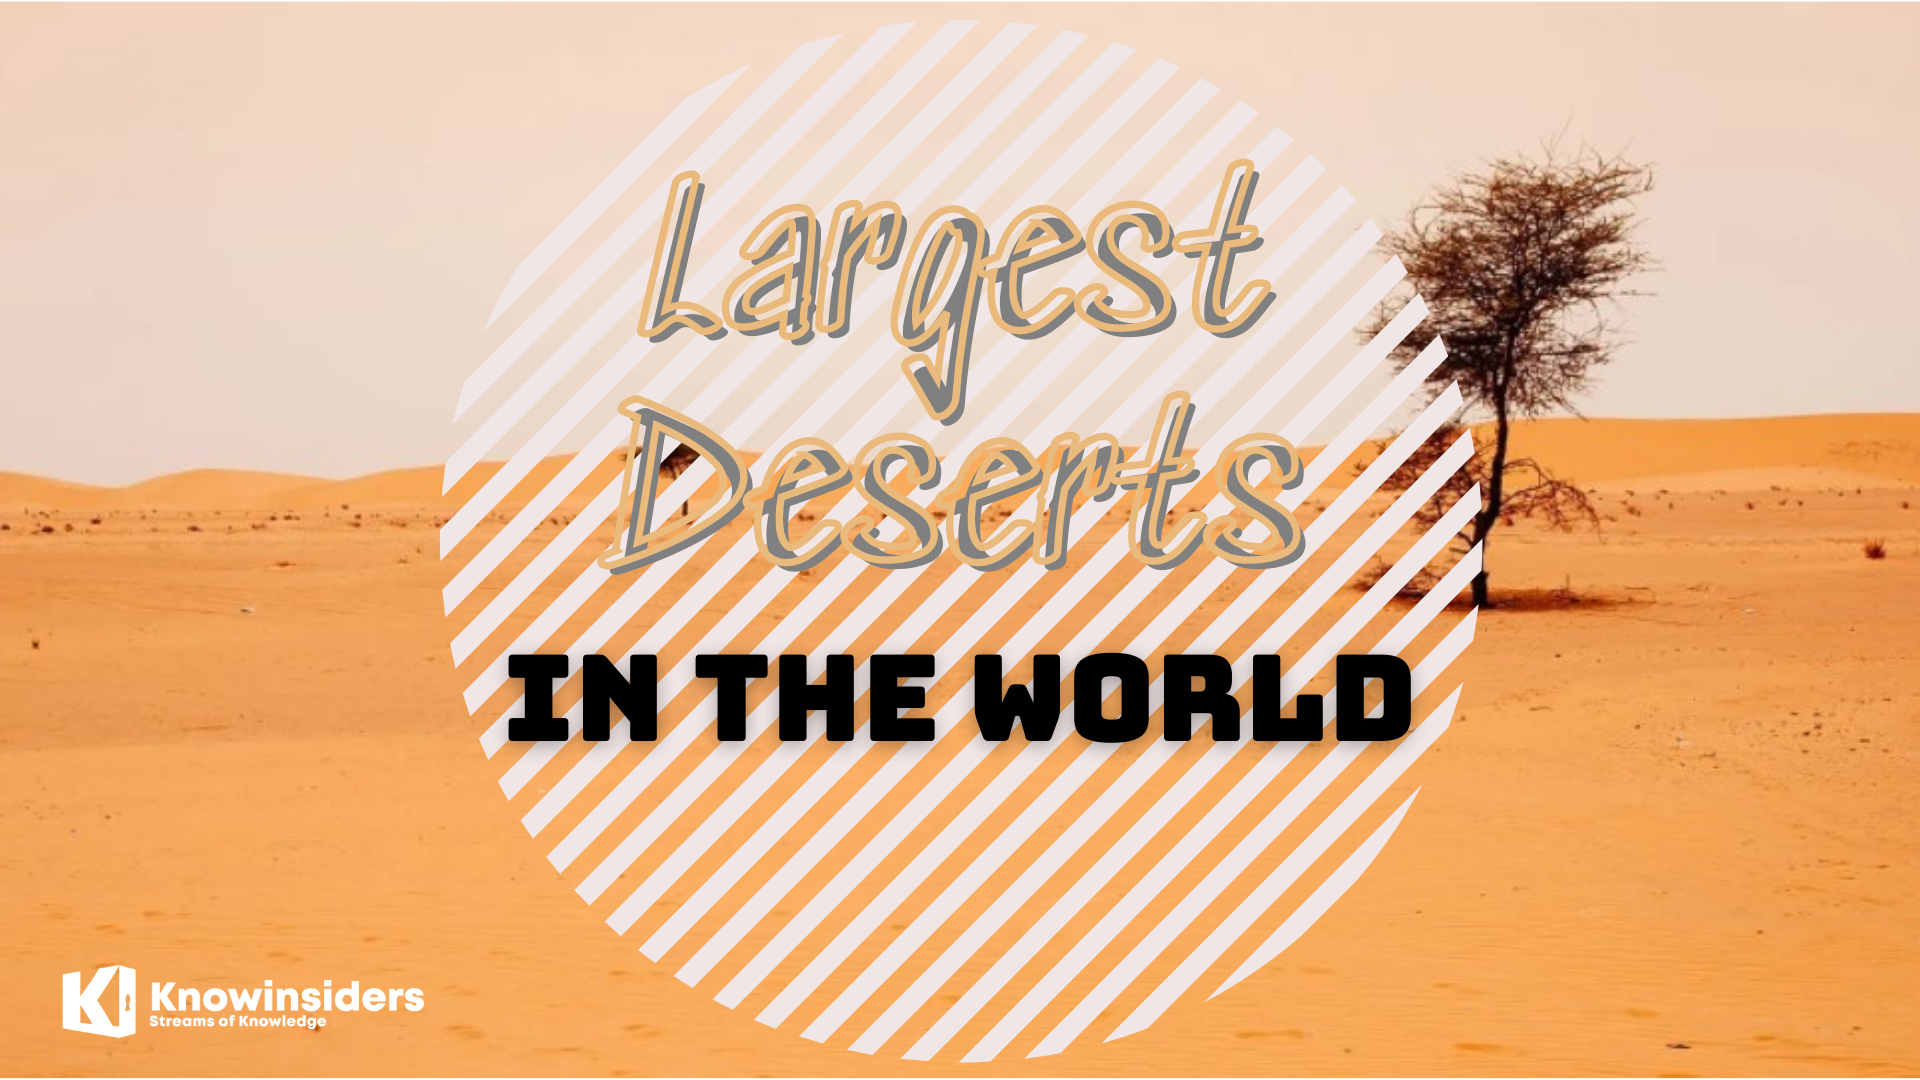 Top Largest Deserts In The World. Photo: knowinsiders.